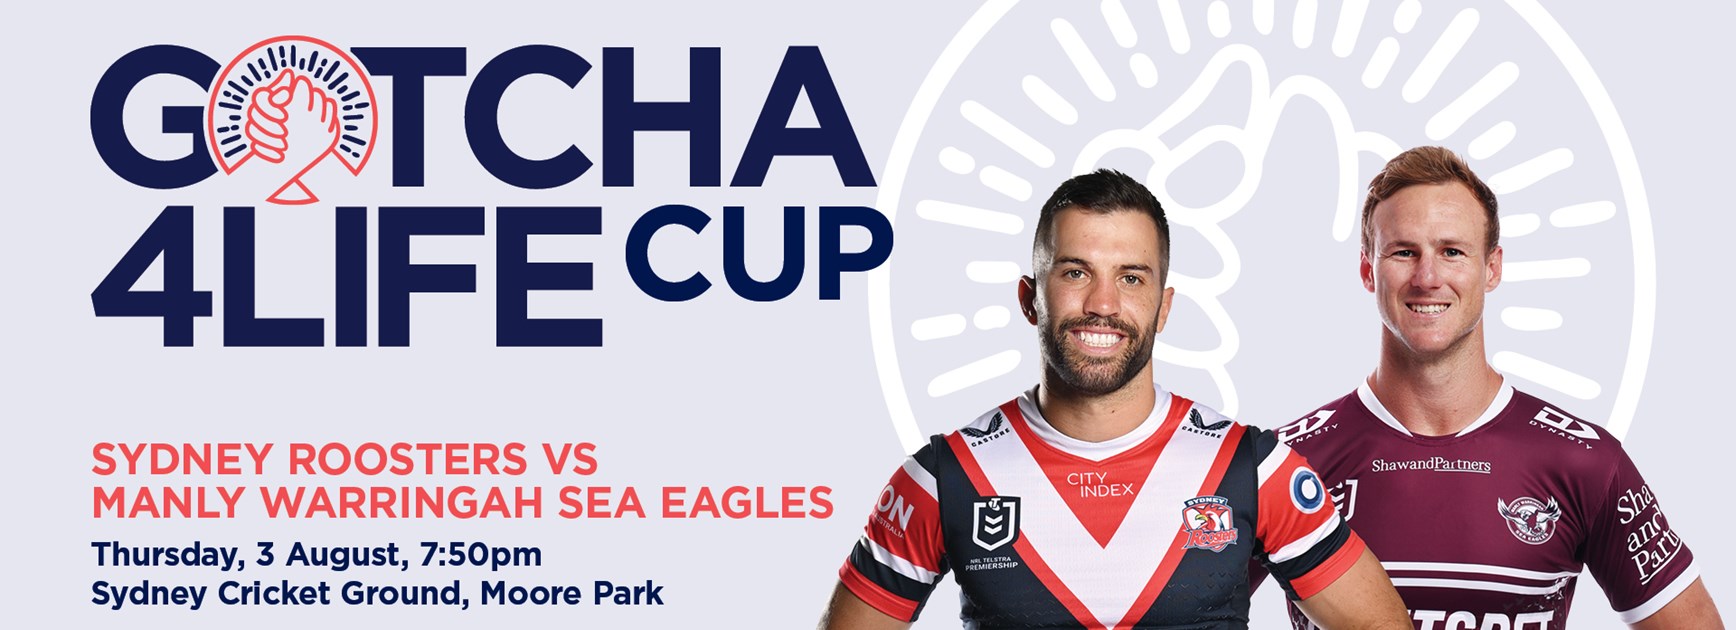 Roosters and Sea Eagles to go head-to-head at Gotcha4Life Cup